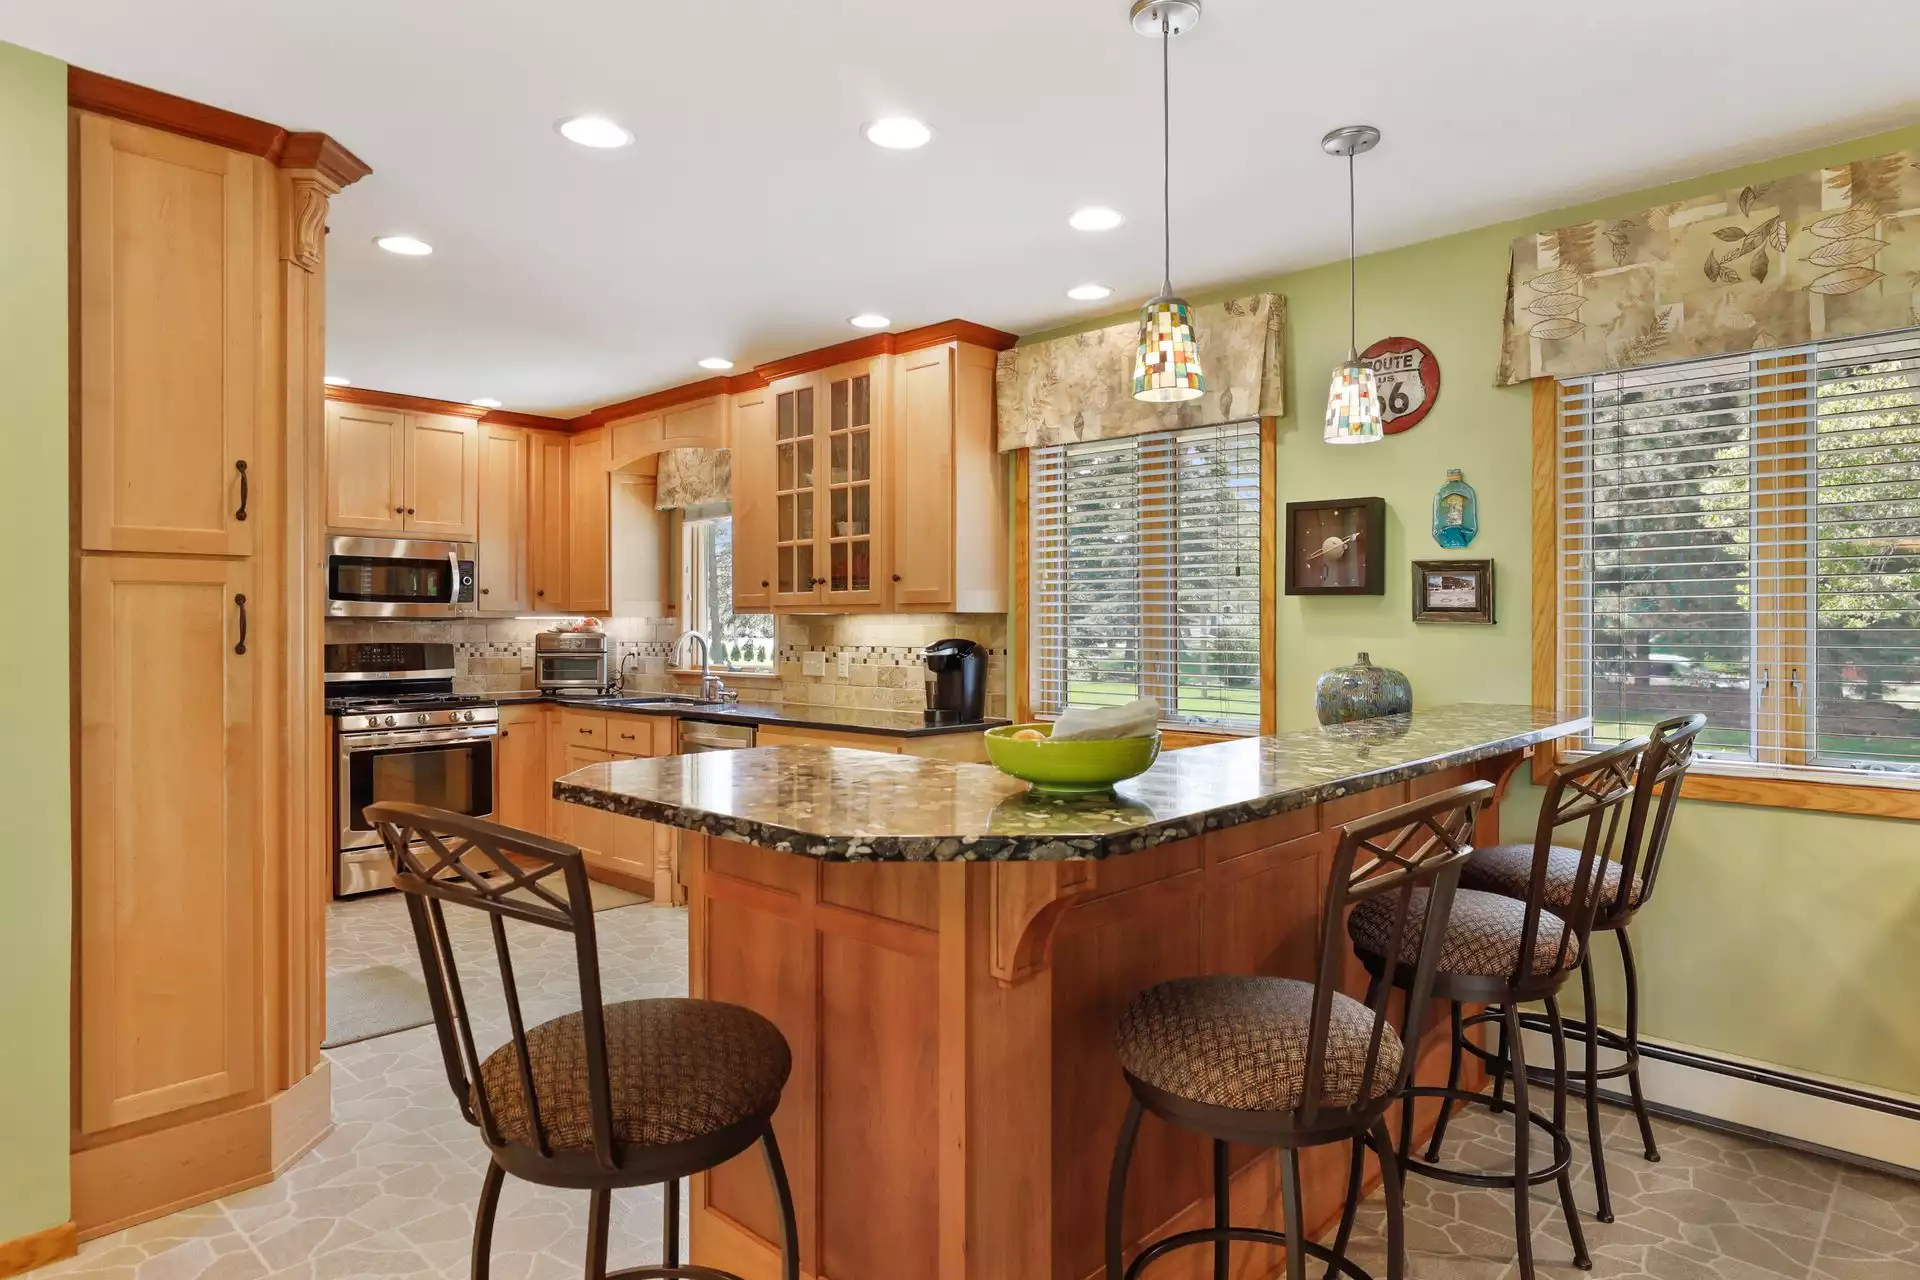 Maplewood Home For Sale Kitchen Islandand